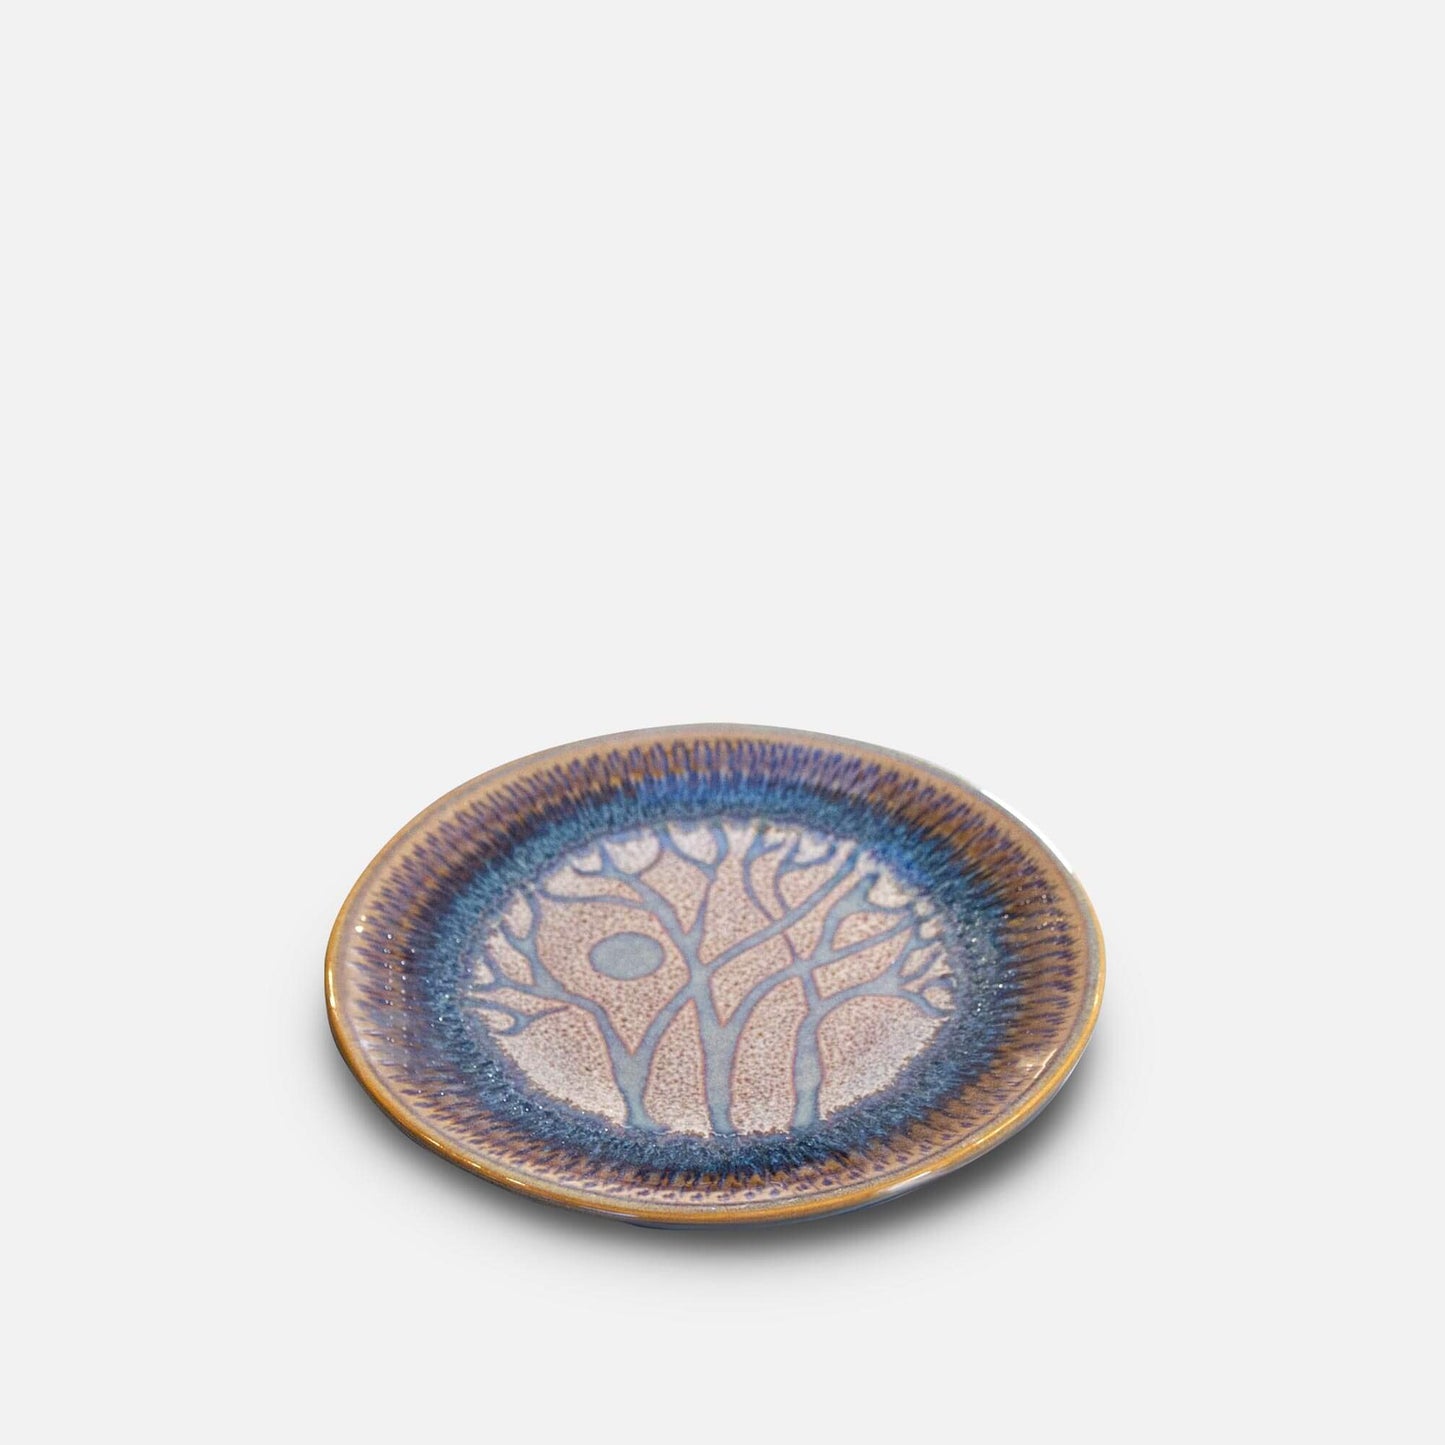 Handmade Pottery Rimless Dessert Plate made by Georgetown Pottery in Maine in Purple Tree pattern